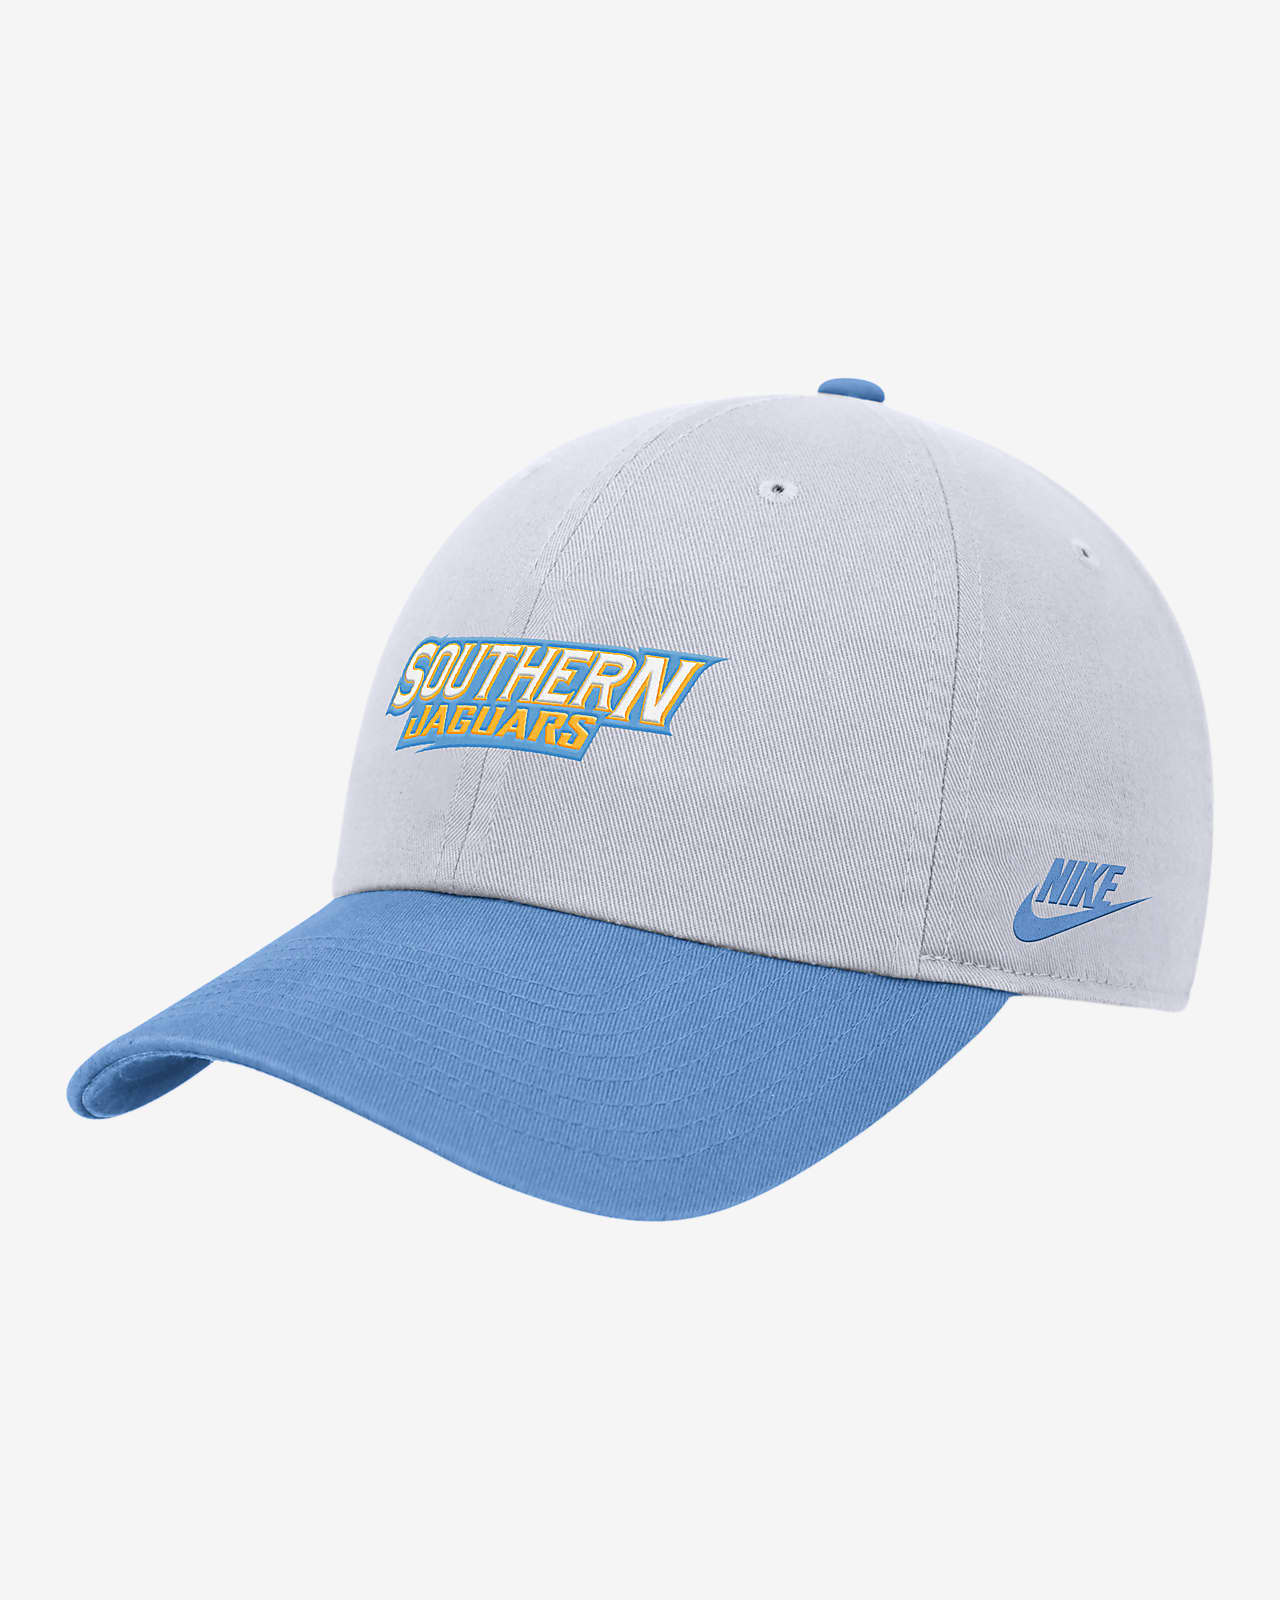 Southern Nike College Adjustable Cap